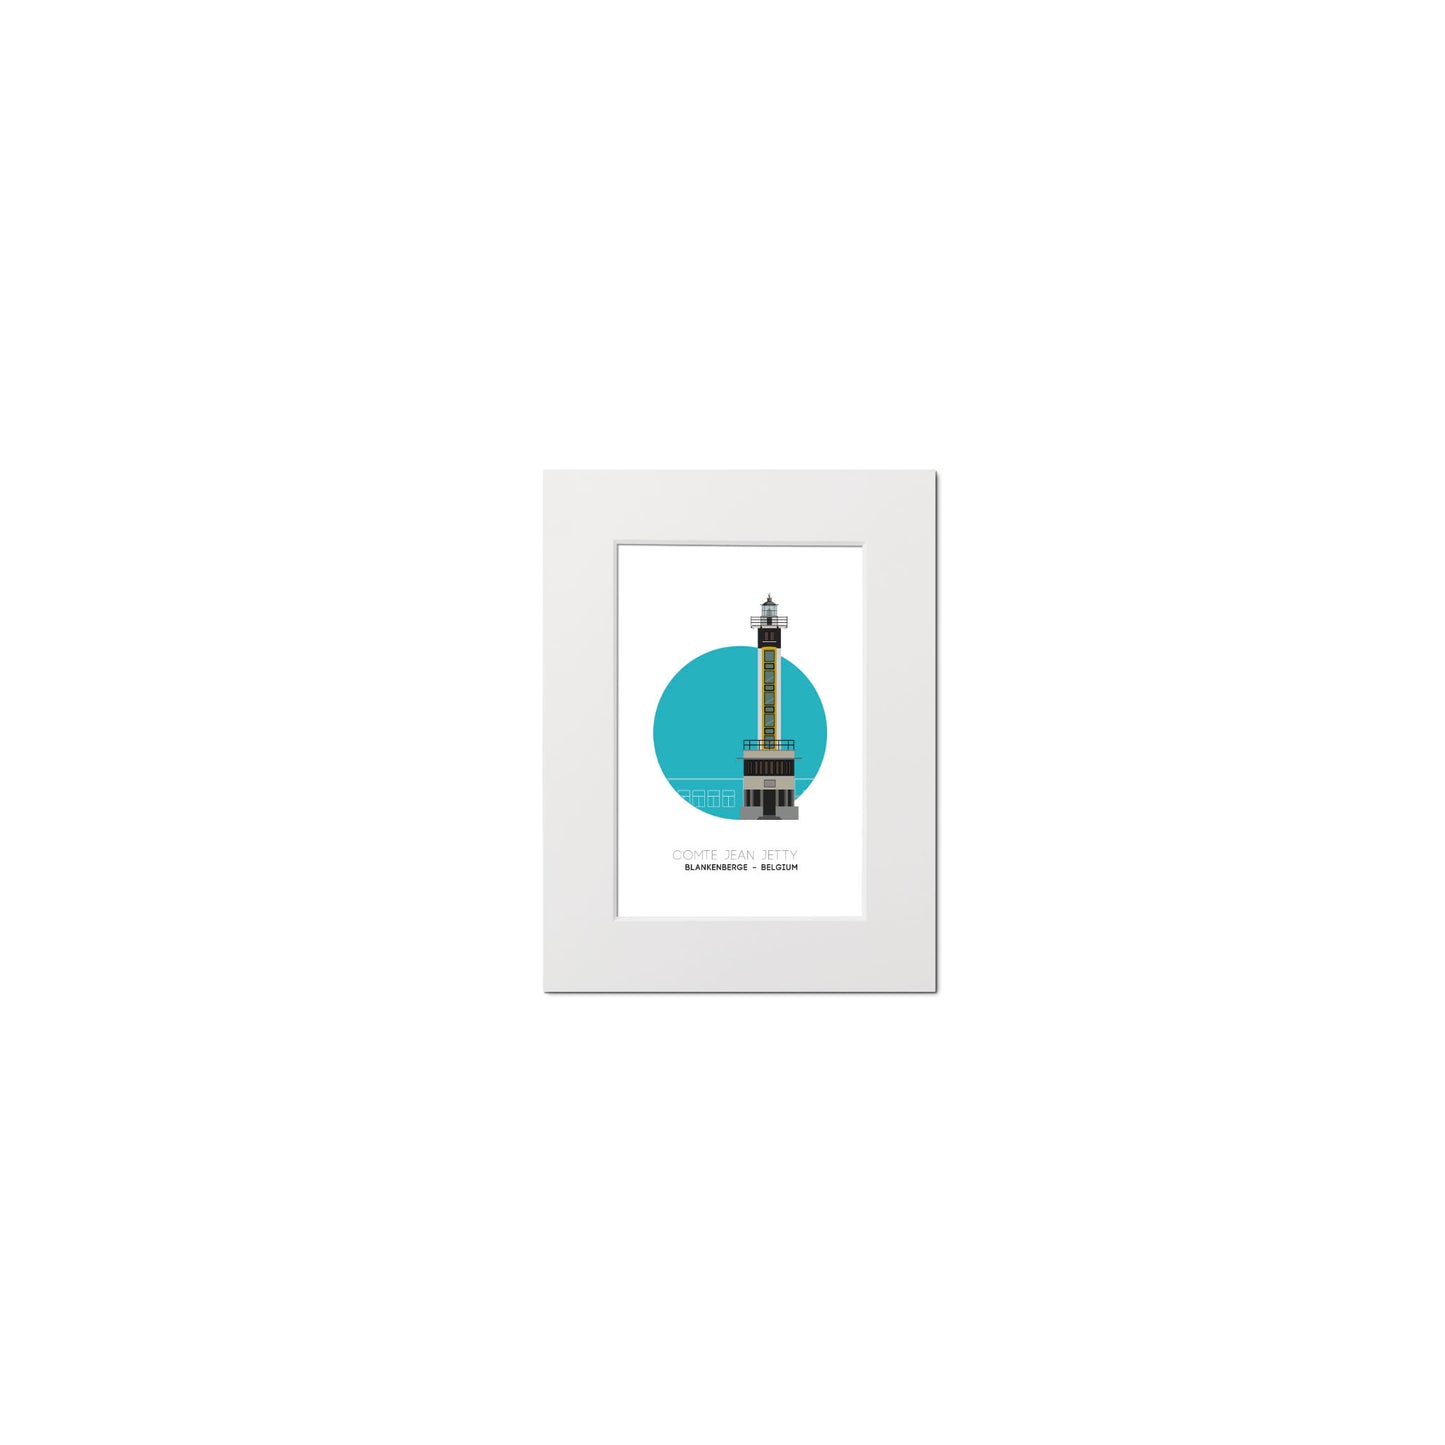 Illustration of the Compte Jean Jetty lighthouse, Blankenberge Belgium. On a white background with aqua blue circle as a backdrop, mounted and measuring 15x20cm.